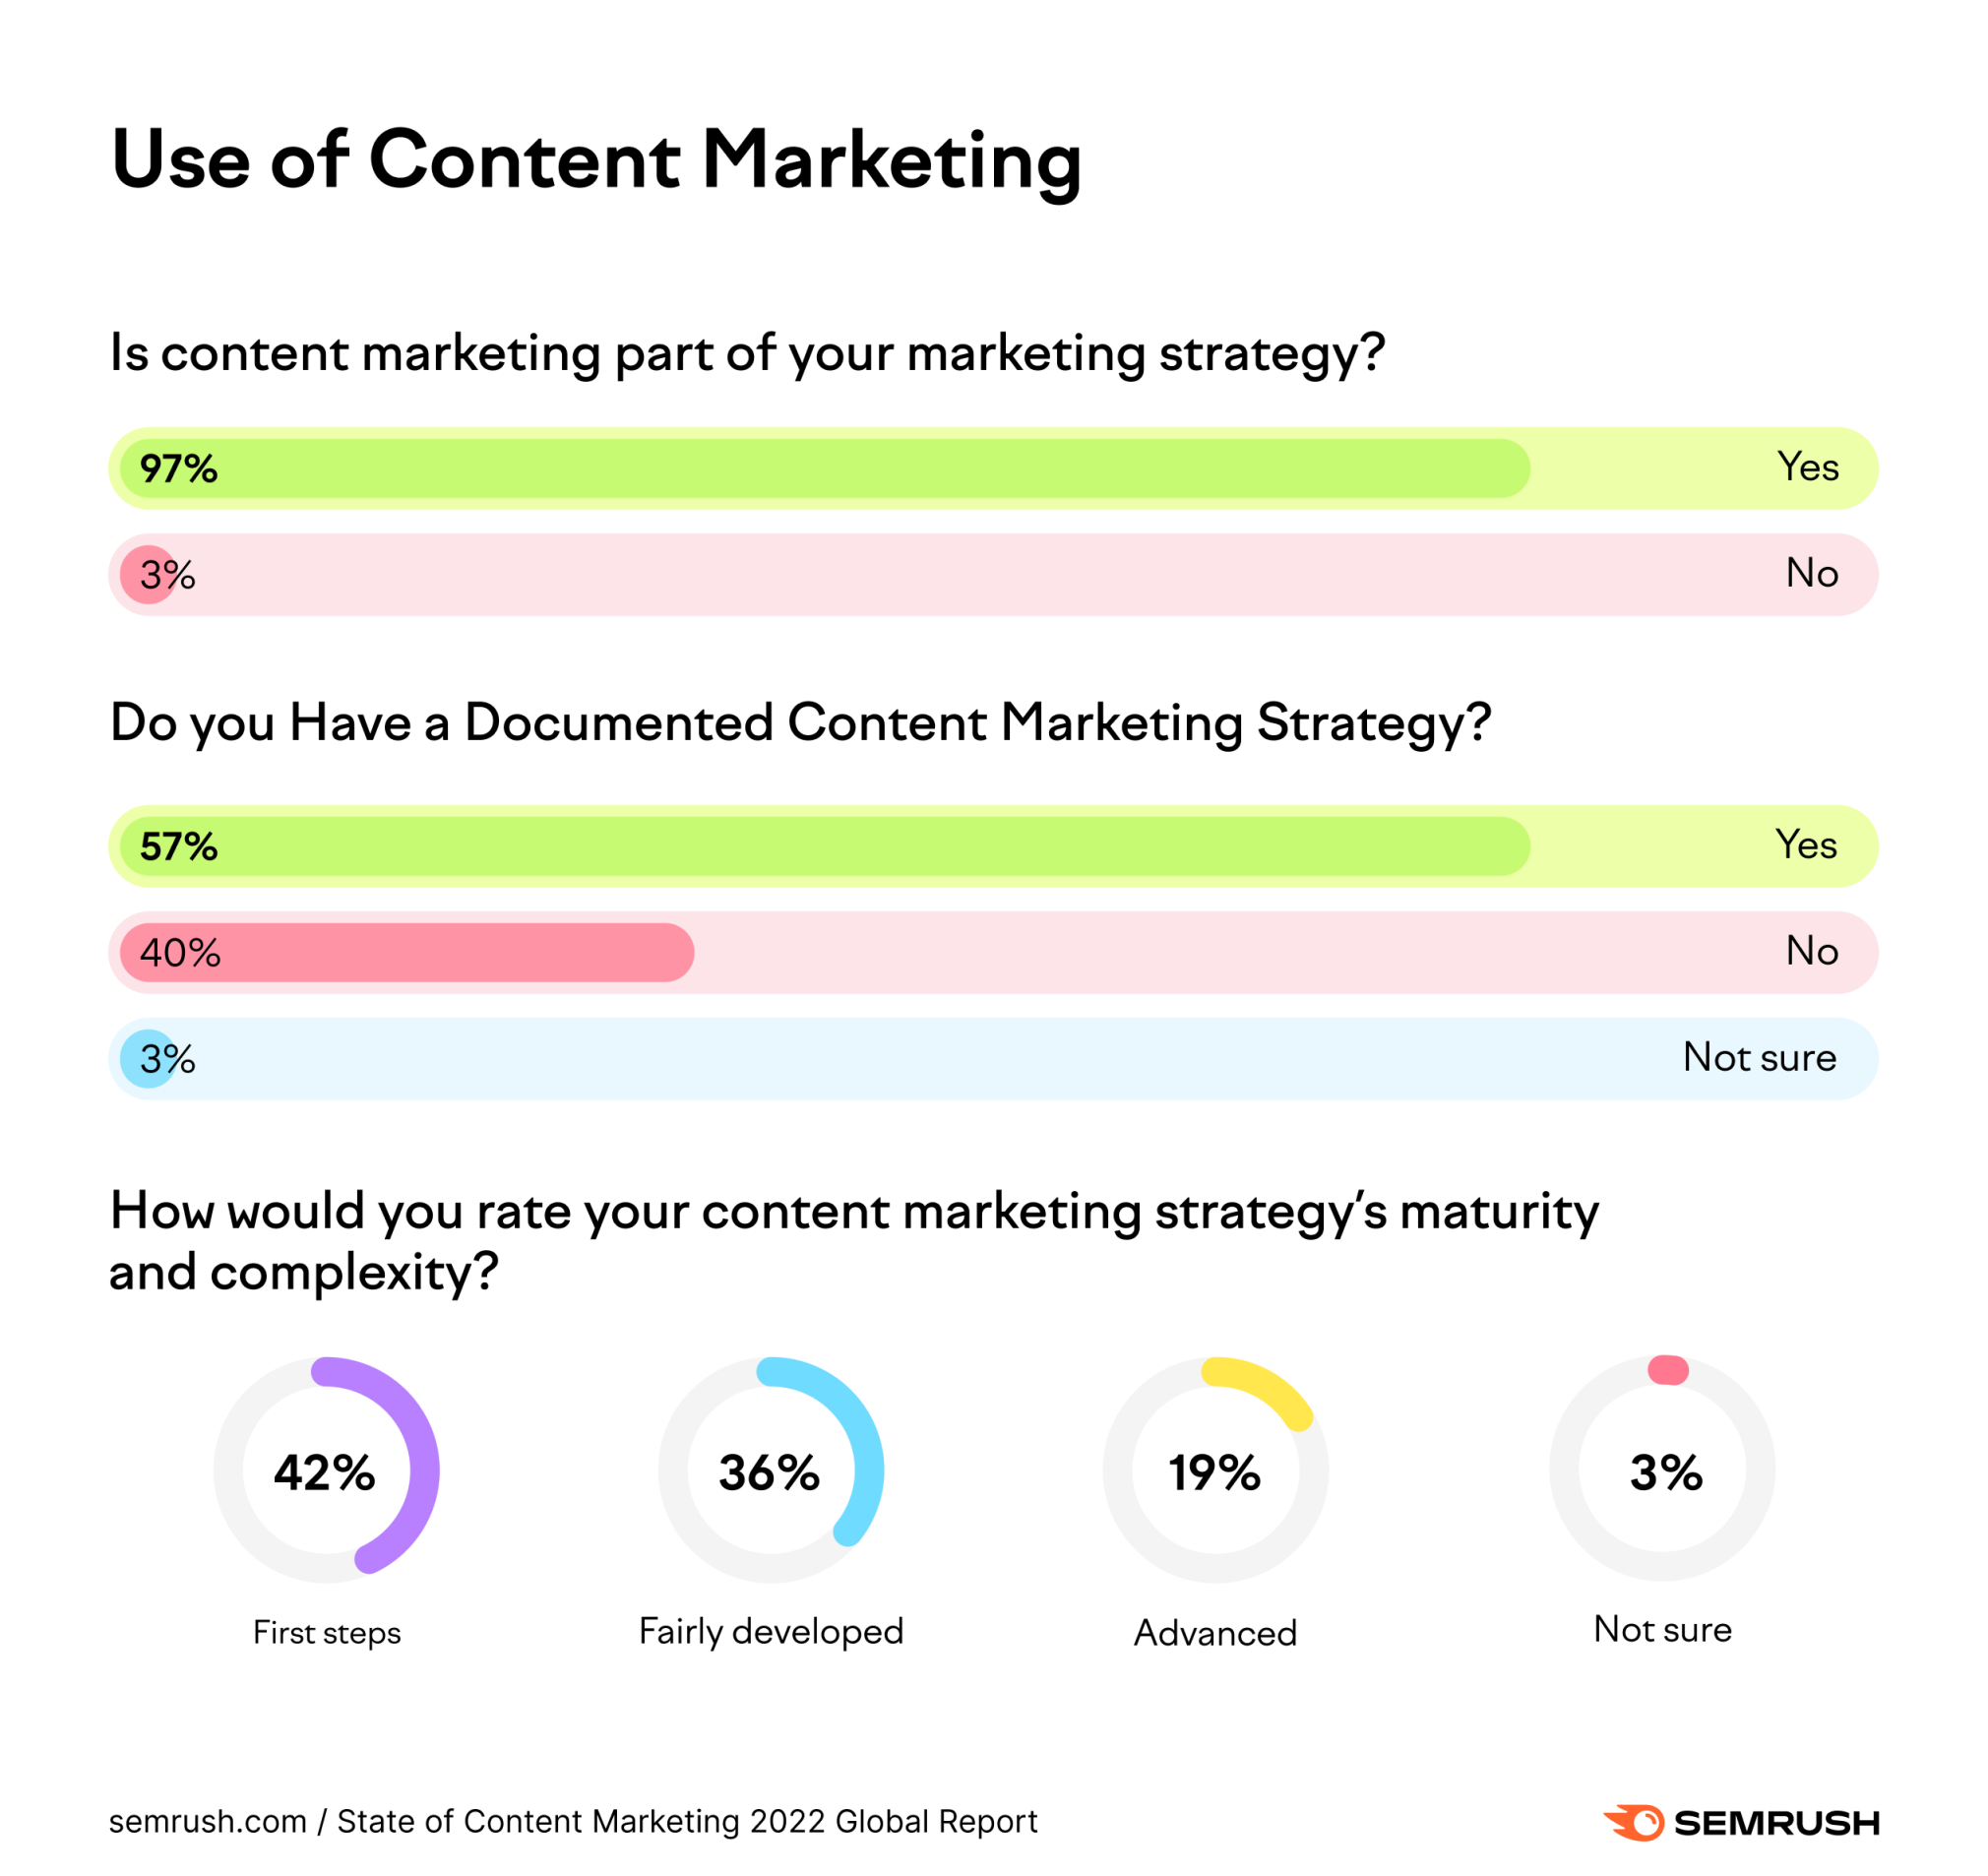 Use of content marketing in 2022